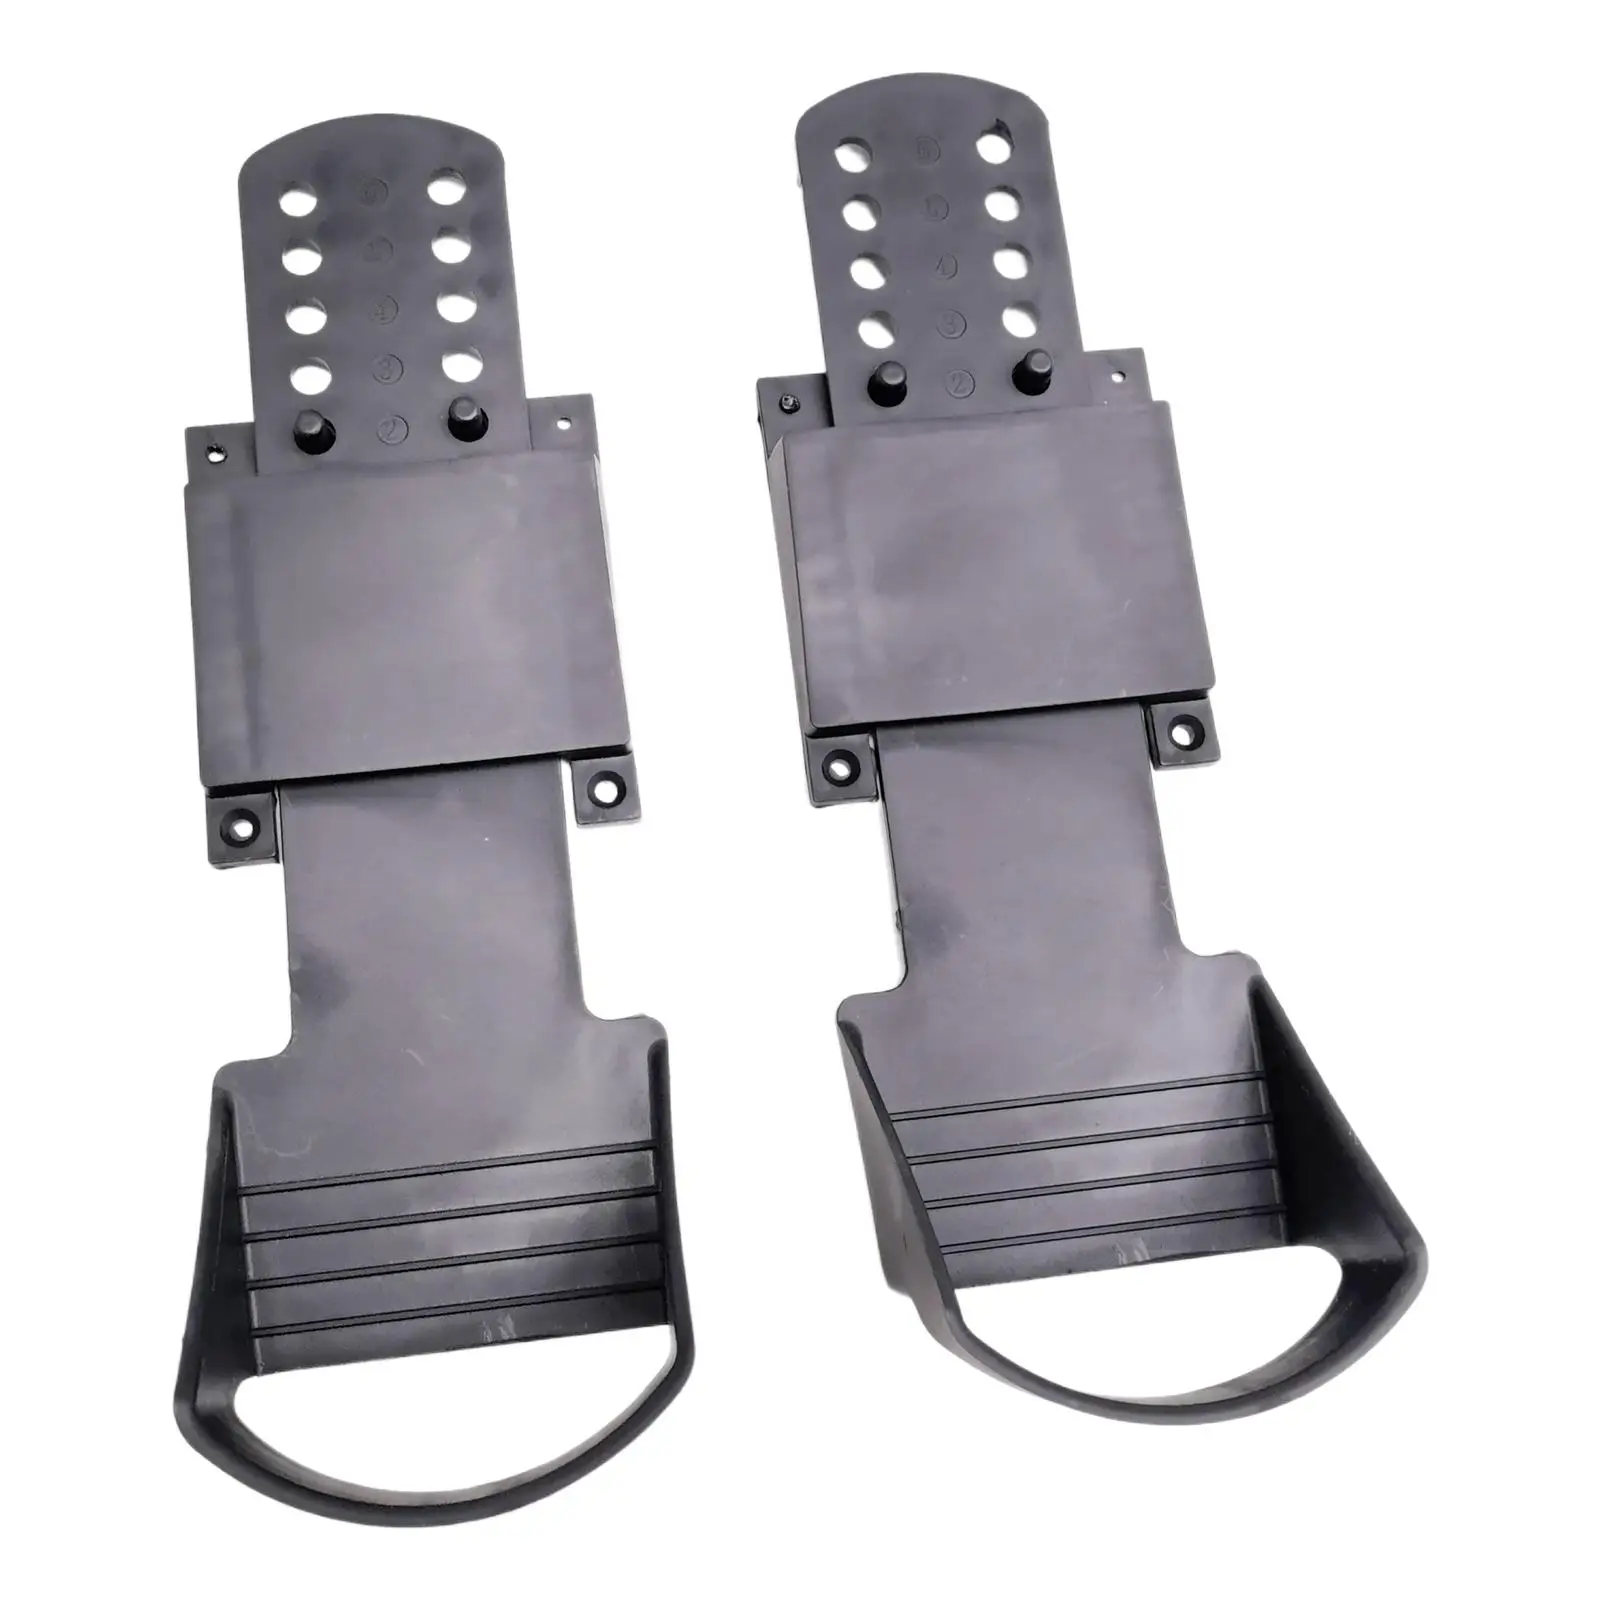 2x Rowing Machine Pedals Easy to Install Multipurpose Lightweight Replacement